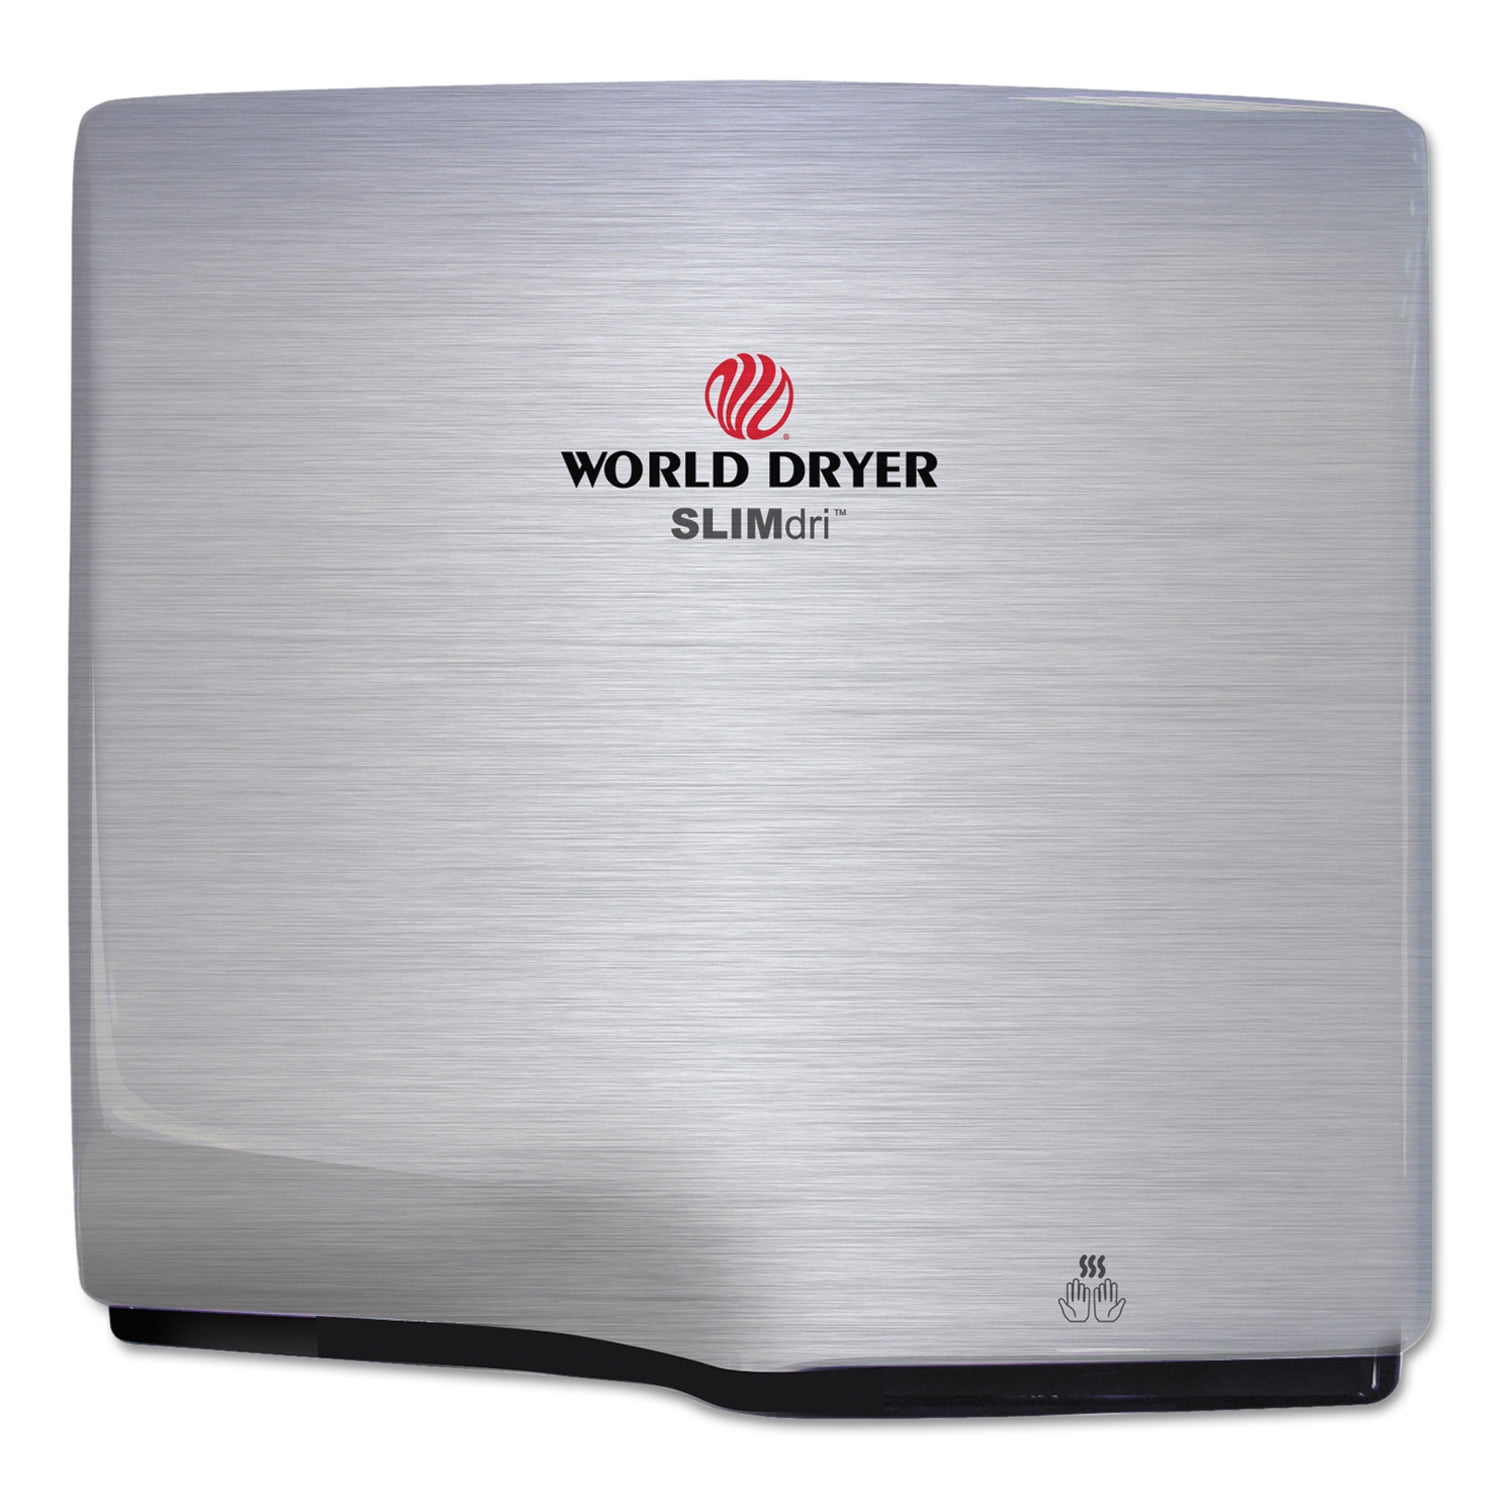 World Dryer Wrll973a Slimdri Hand Dryer Stainless Steel Brushed for sale online 